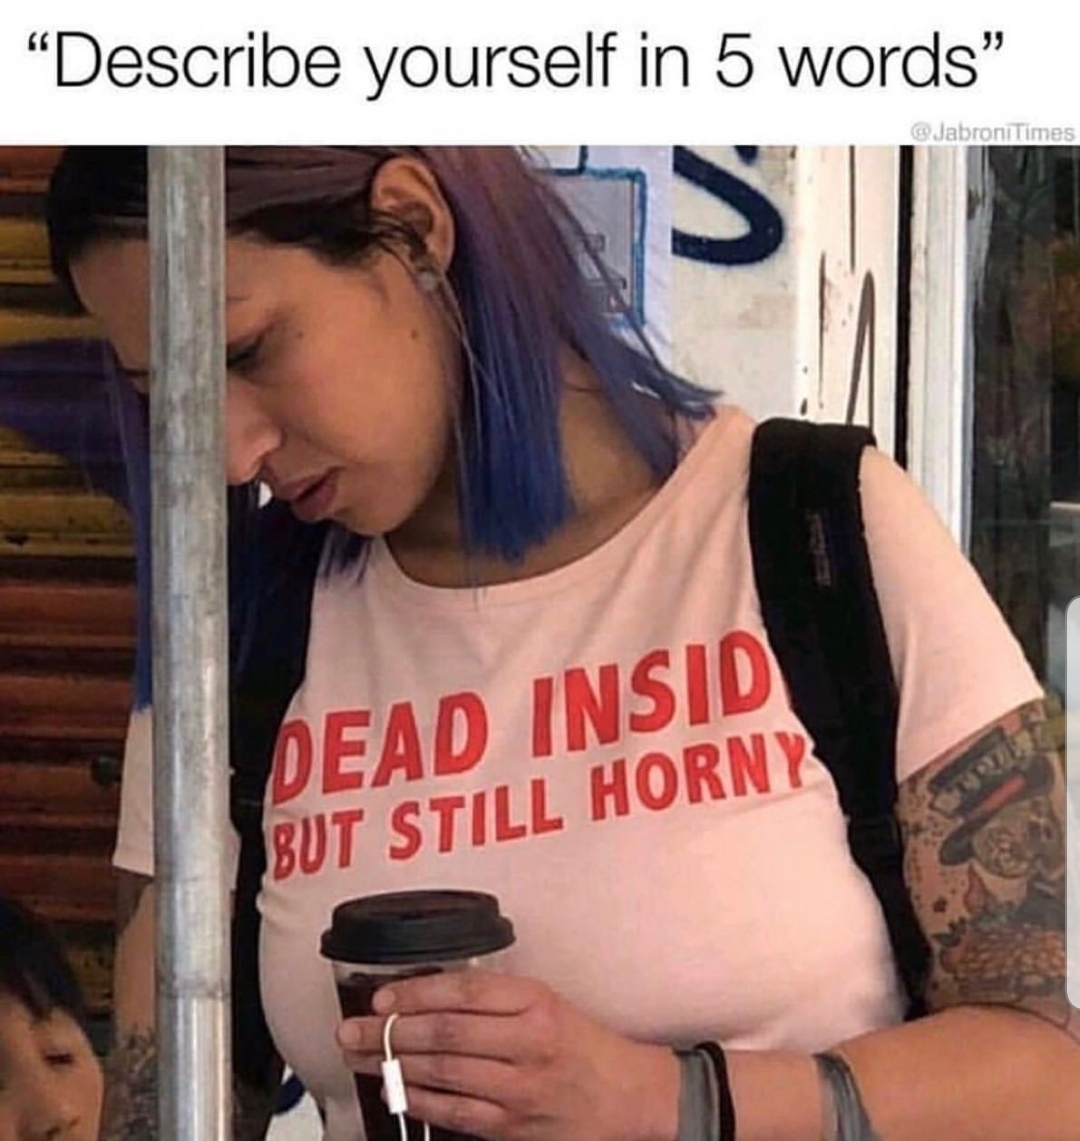 memes fun depression - describe yourself in 5 words woman wearing a tshirt that says dead inside but still horny